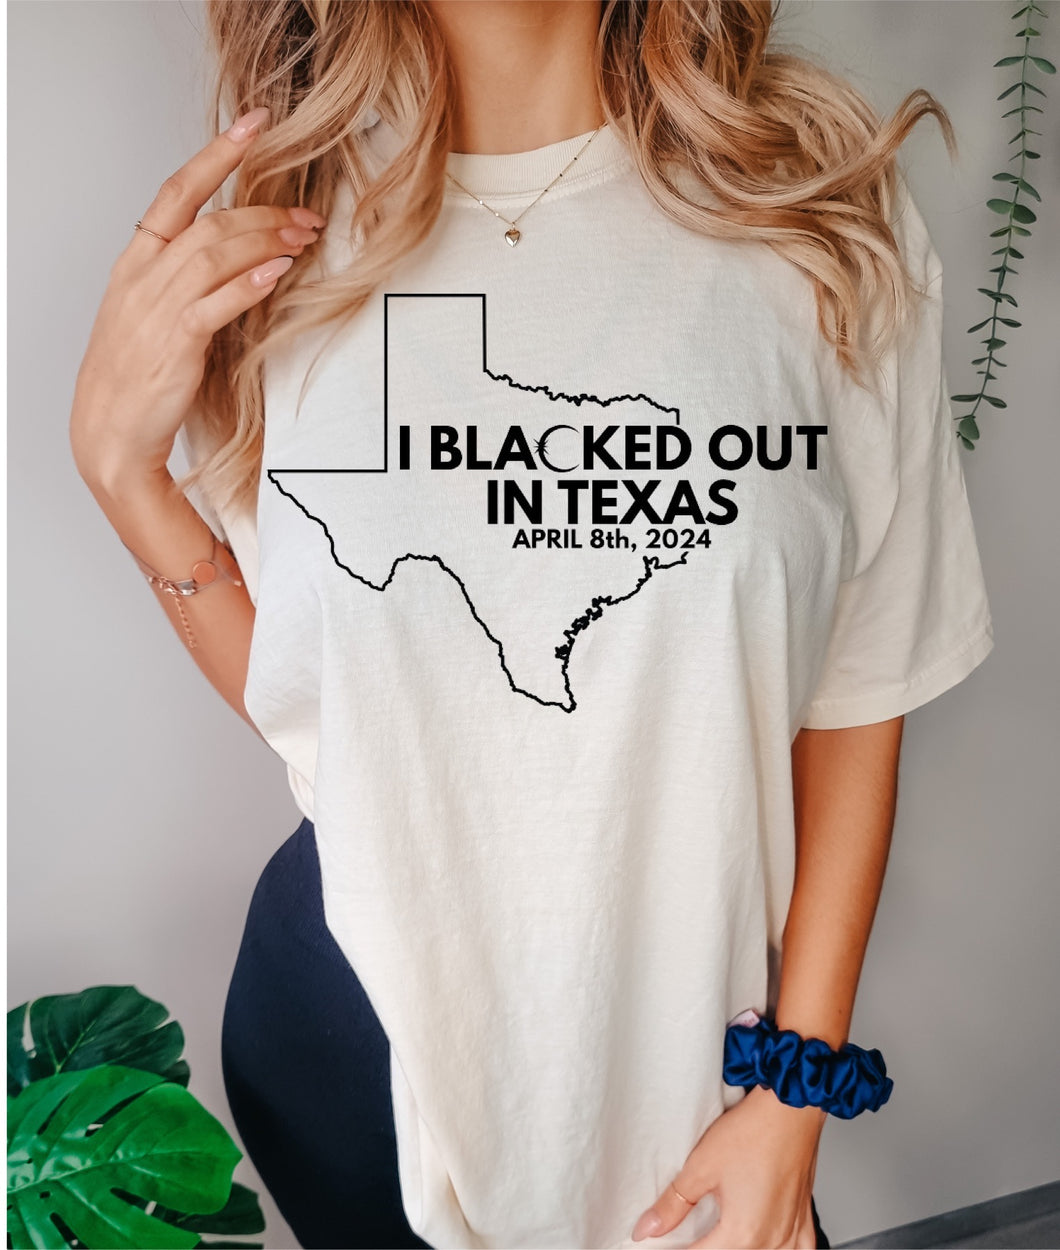 Solar Eclipse Tees- I blacked out in Texas